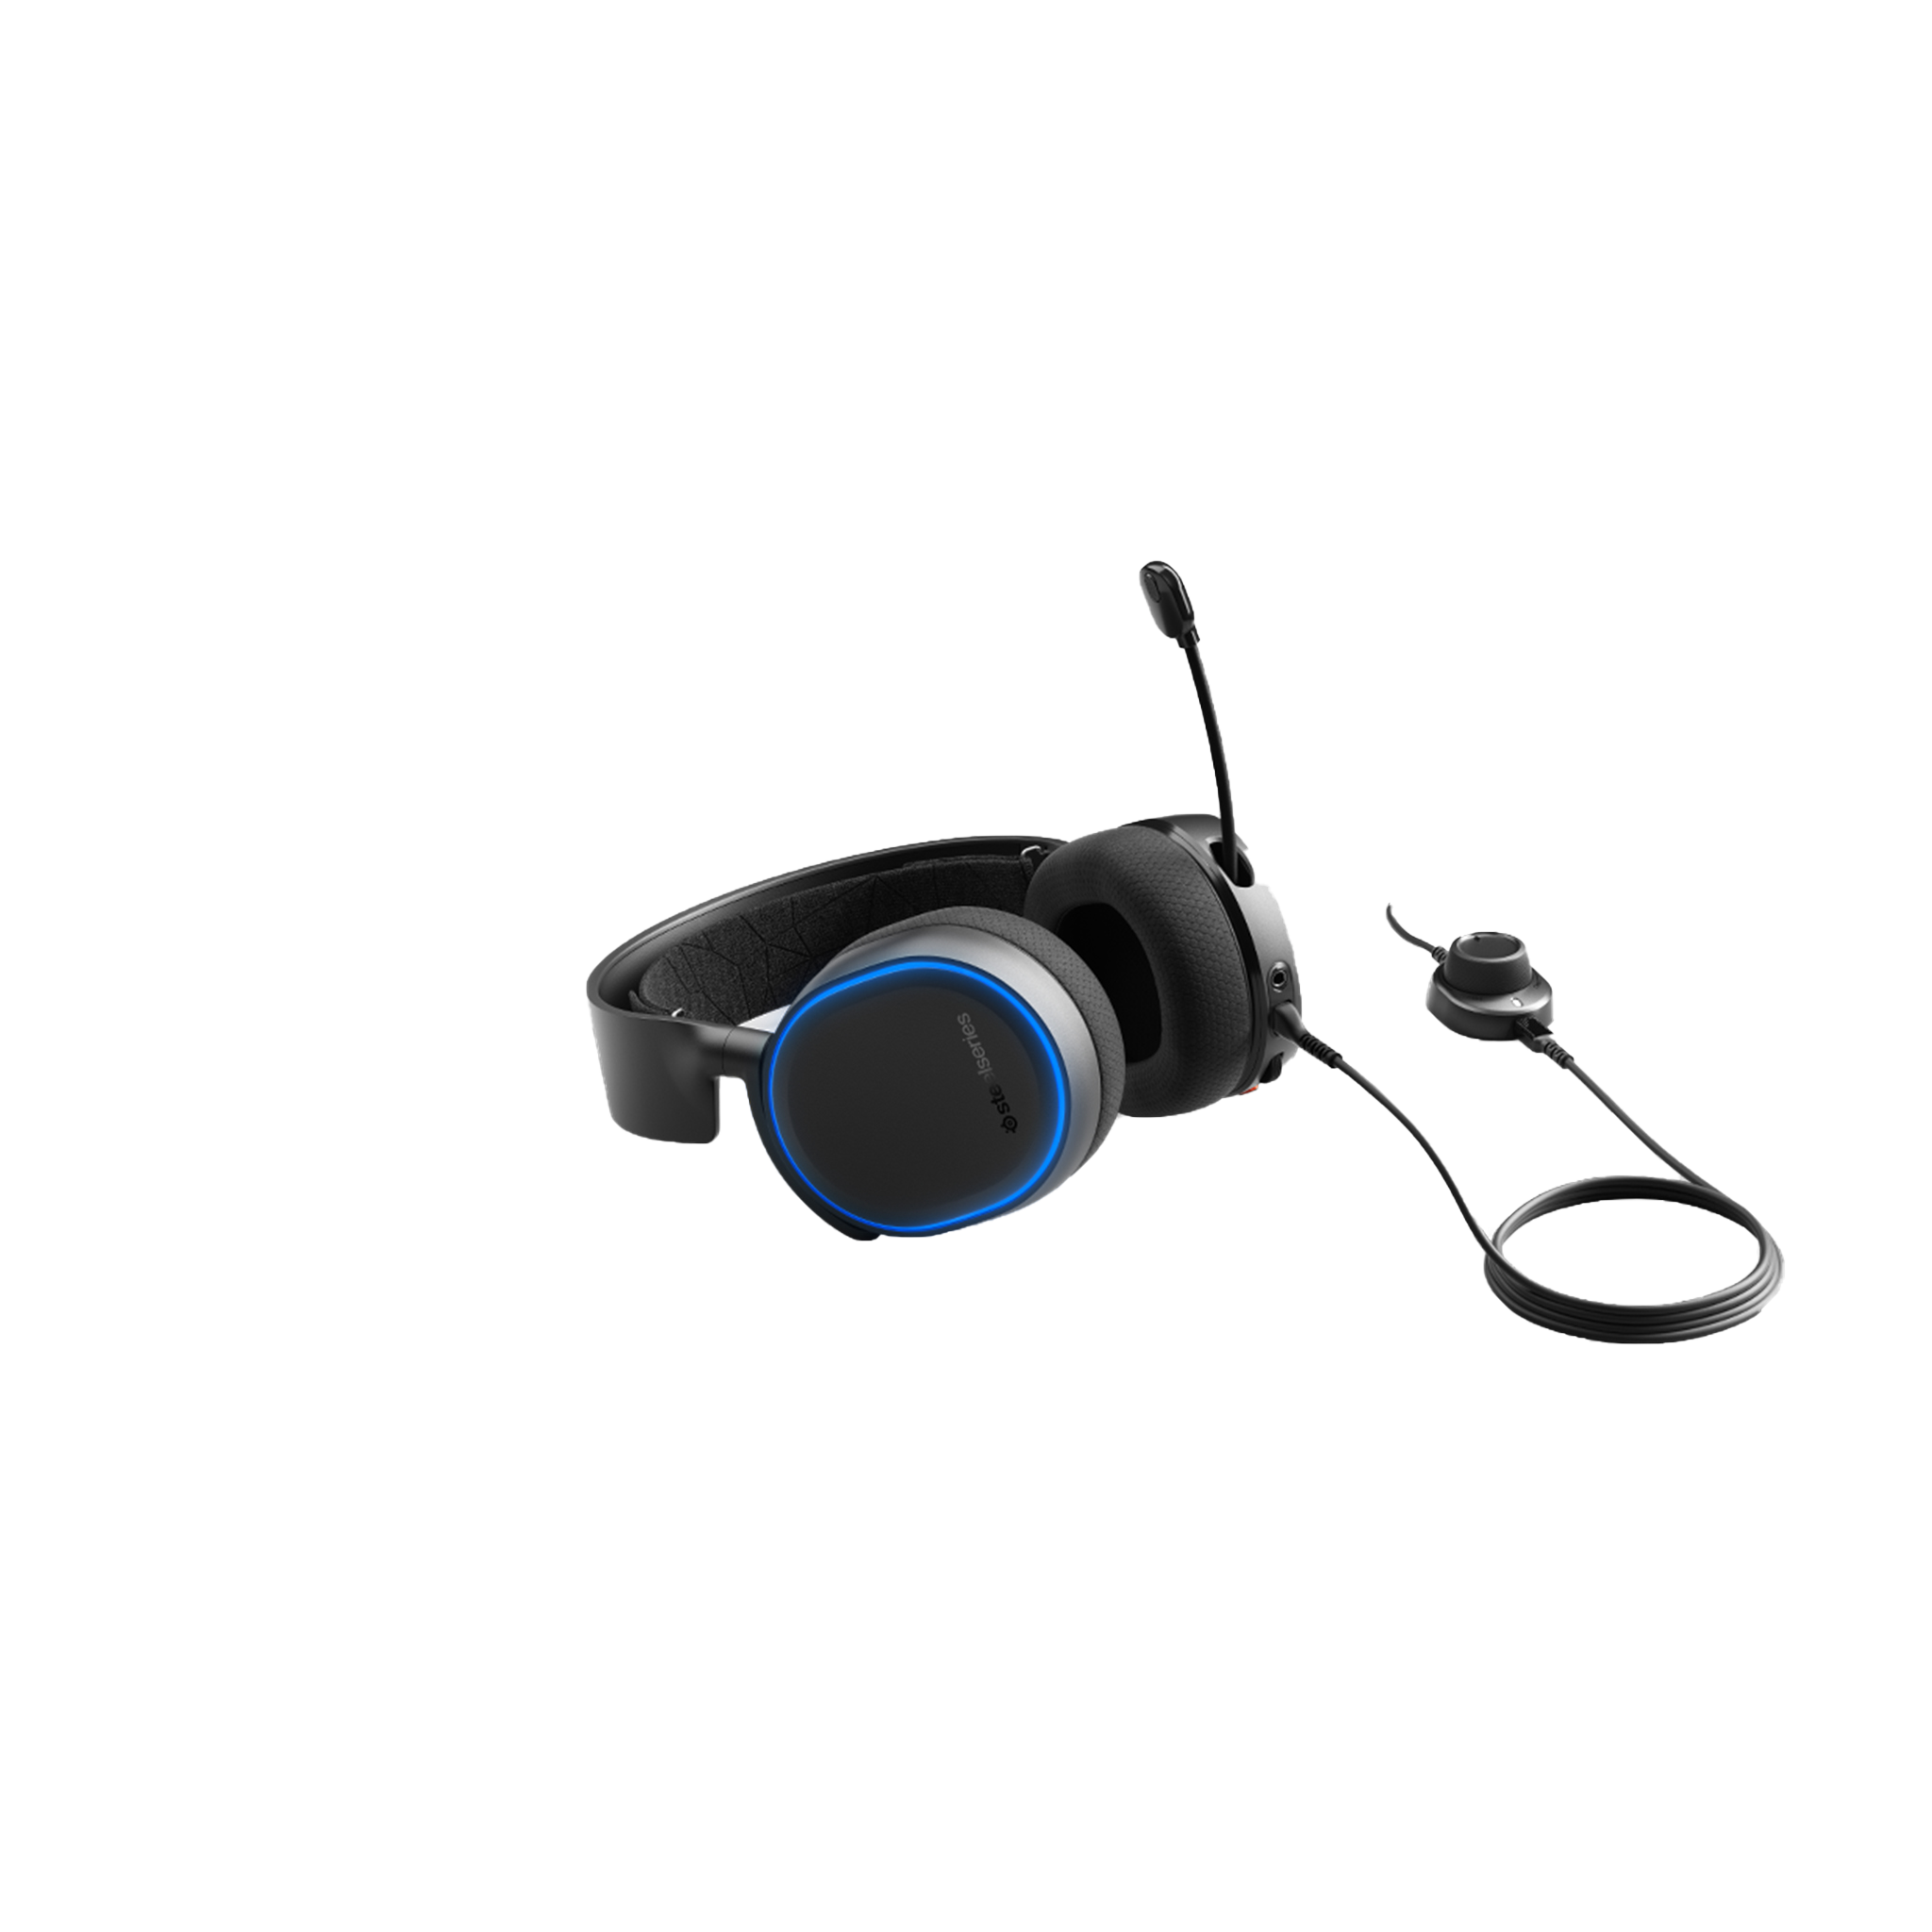 SteelSeries Gaming Headset Arctis 3 (2019 Edition)